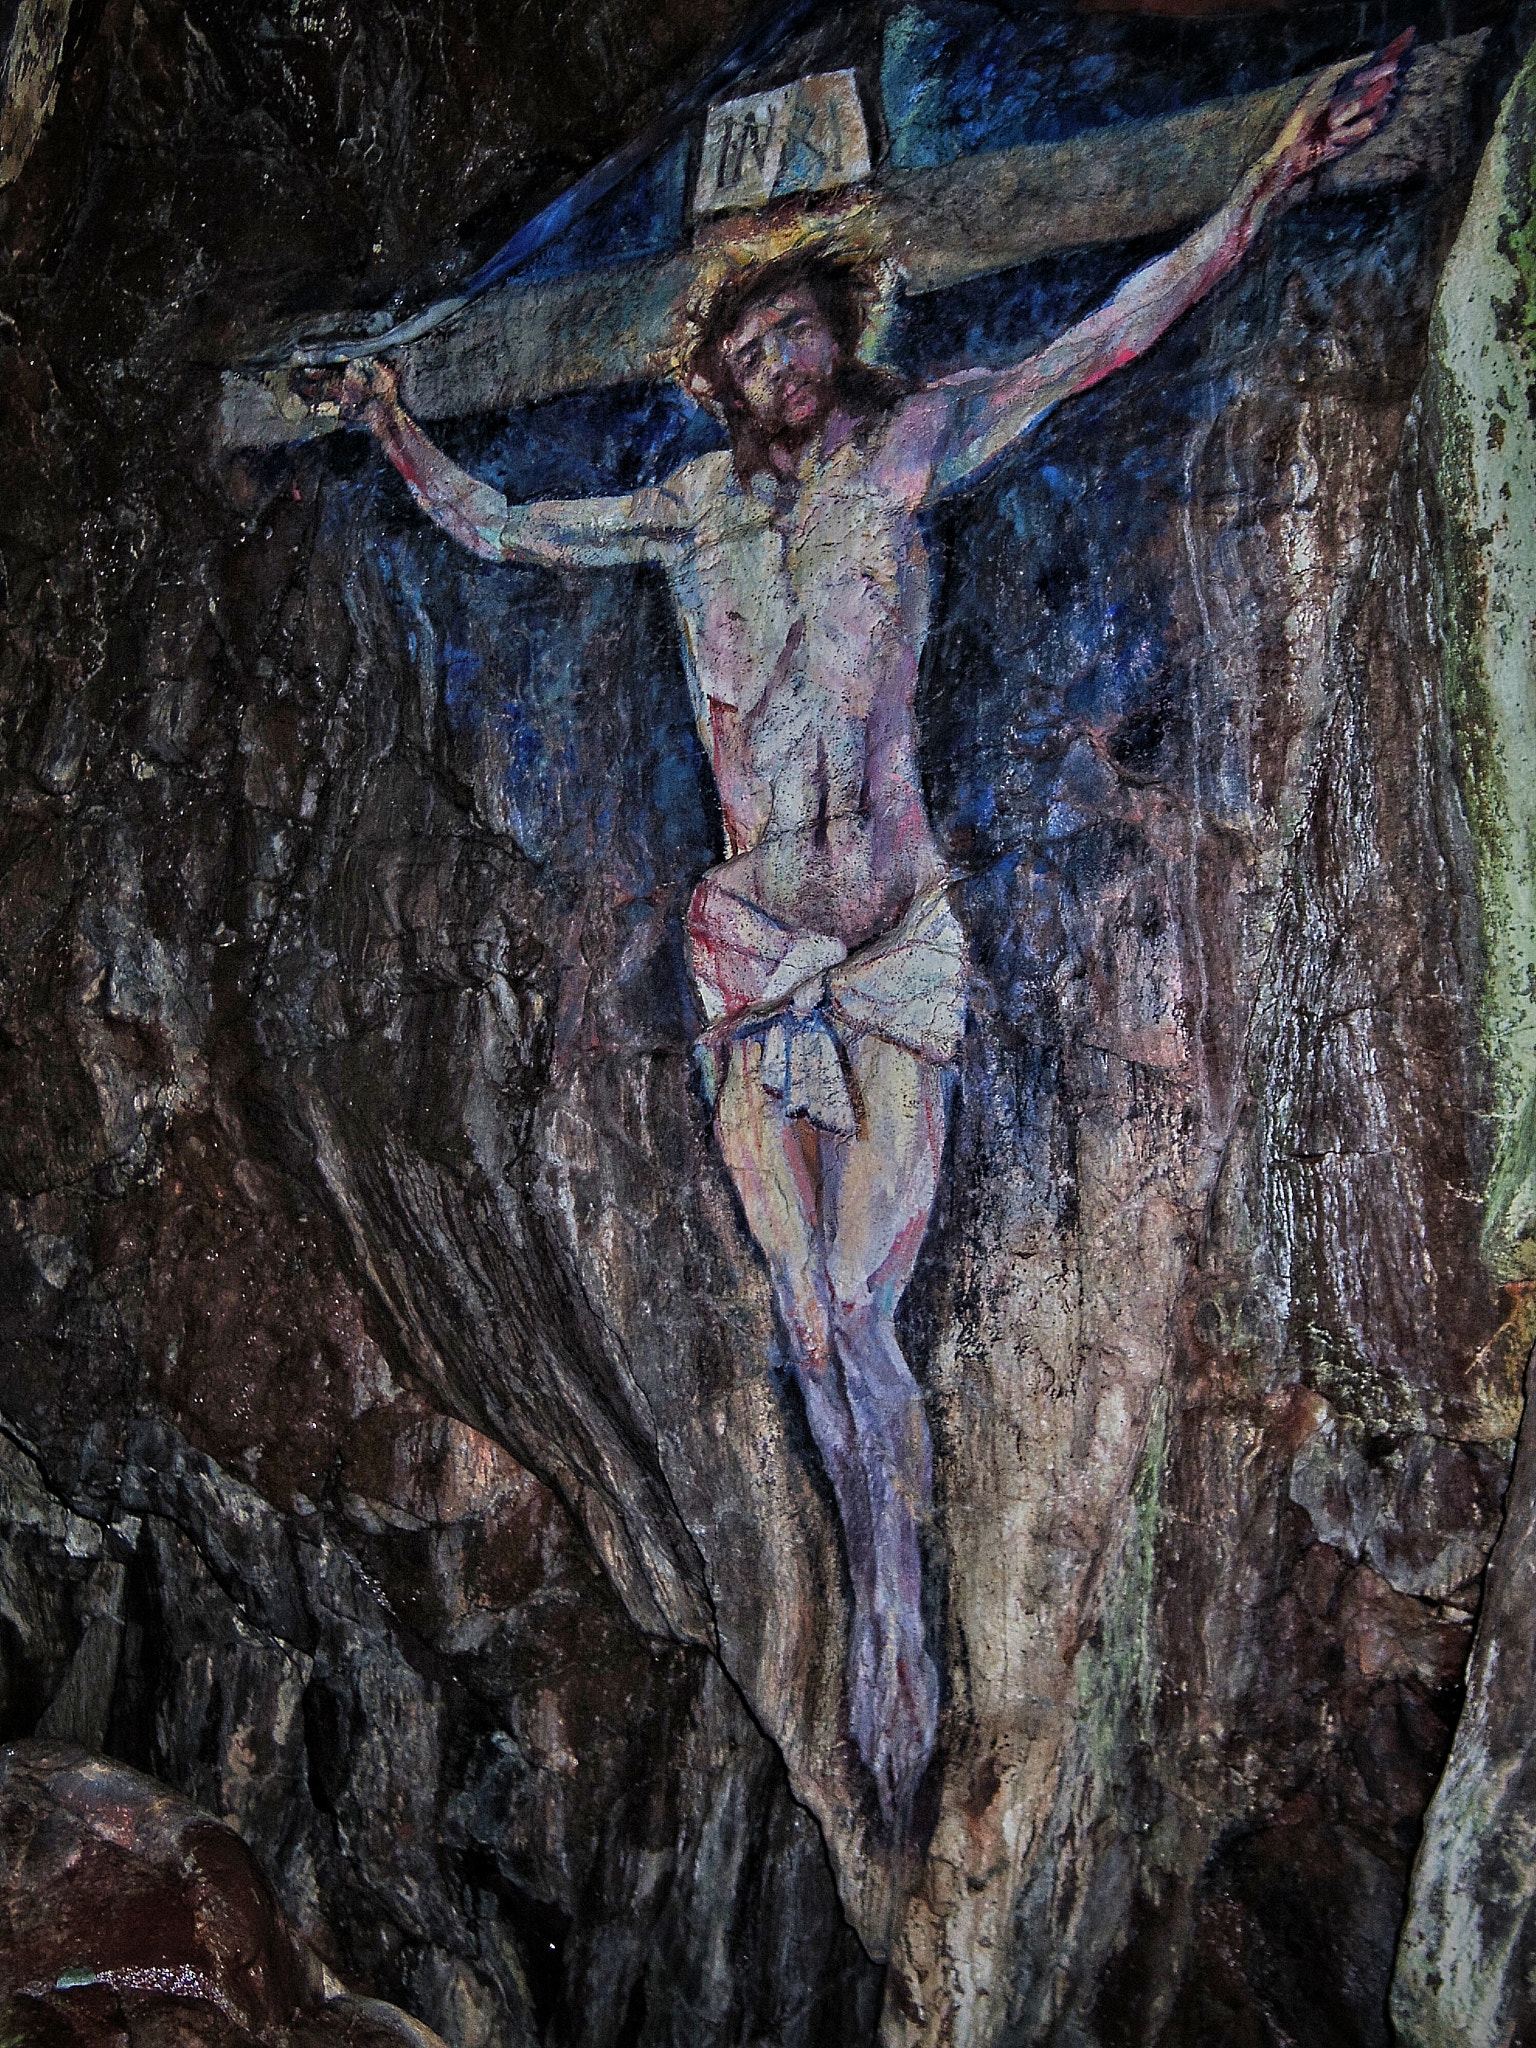 Pentax 01 Standard Prime sample photo. Cave painting of the crucifixion, davaar island, kintyre photography